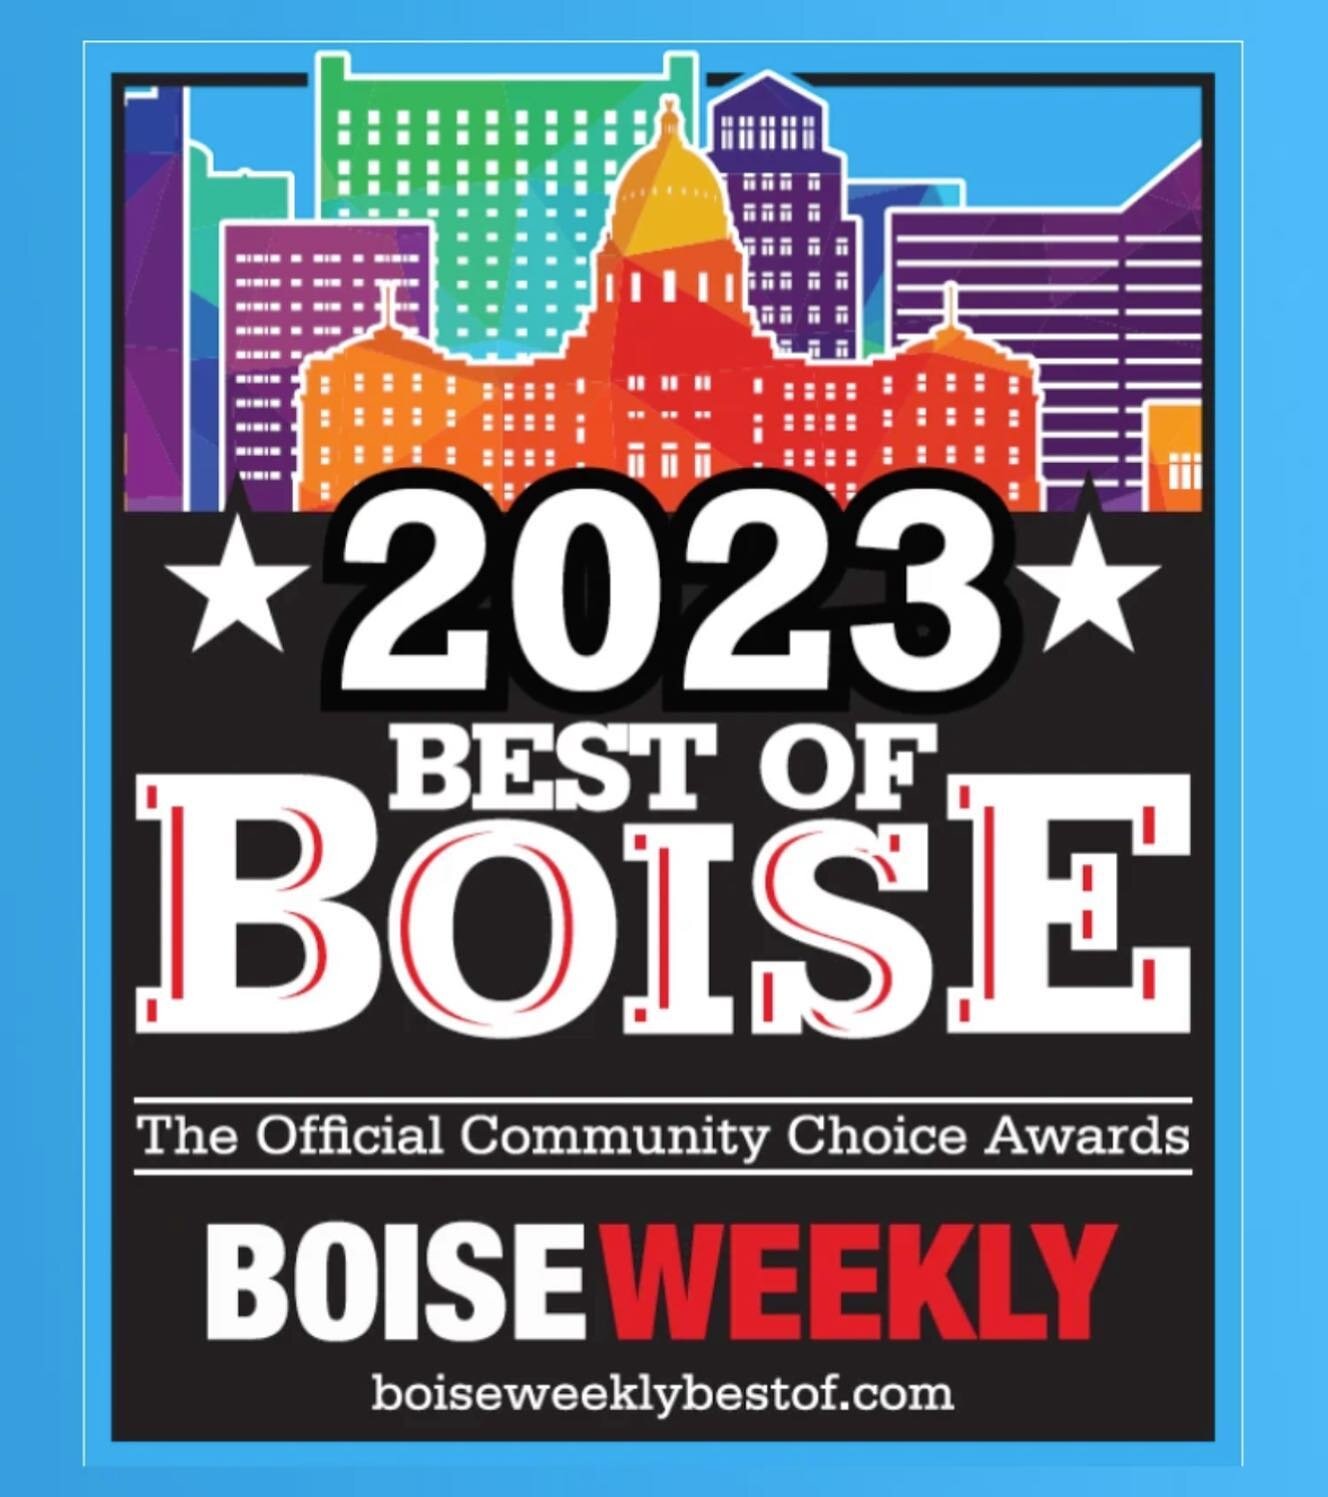 It&rsquo;s that time again!! 

We have 3 categories we can be nominated for 

Under Beauty and Health 
Best Barber Shop
Best Hair Salon

People Category
Best Stylist!

We appreciate all the love and support!
Go to Boise weekly for voting! Or DM for t